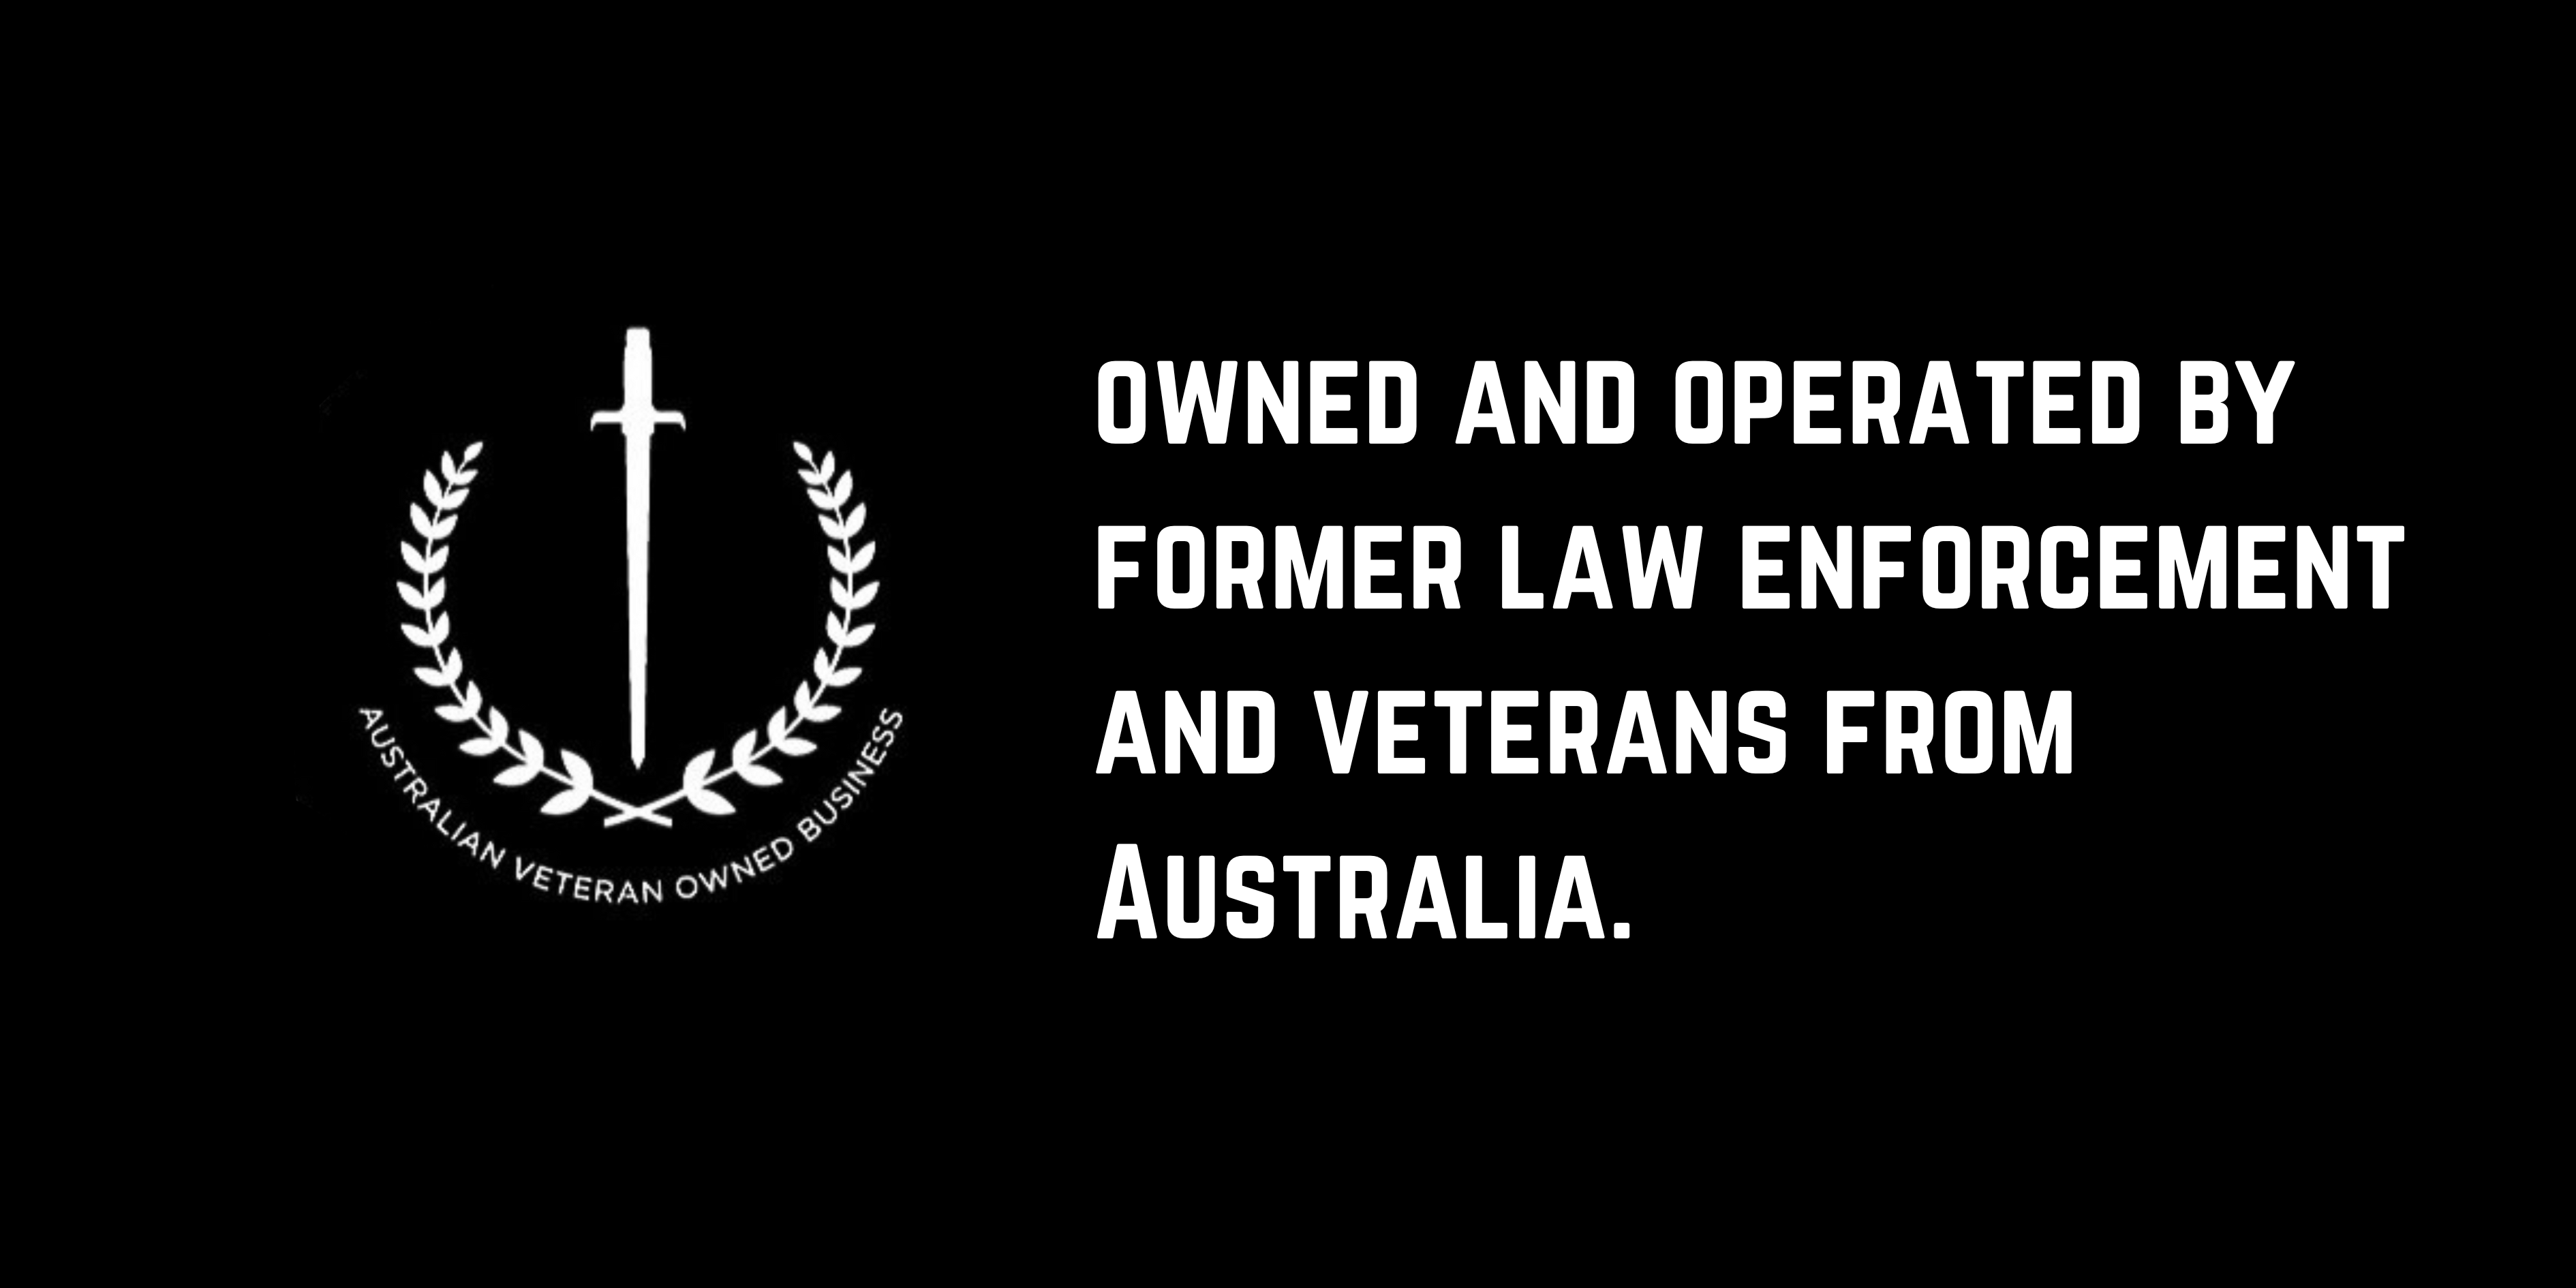 Australian veteran owned business. Australian owned and operated.